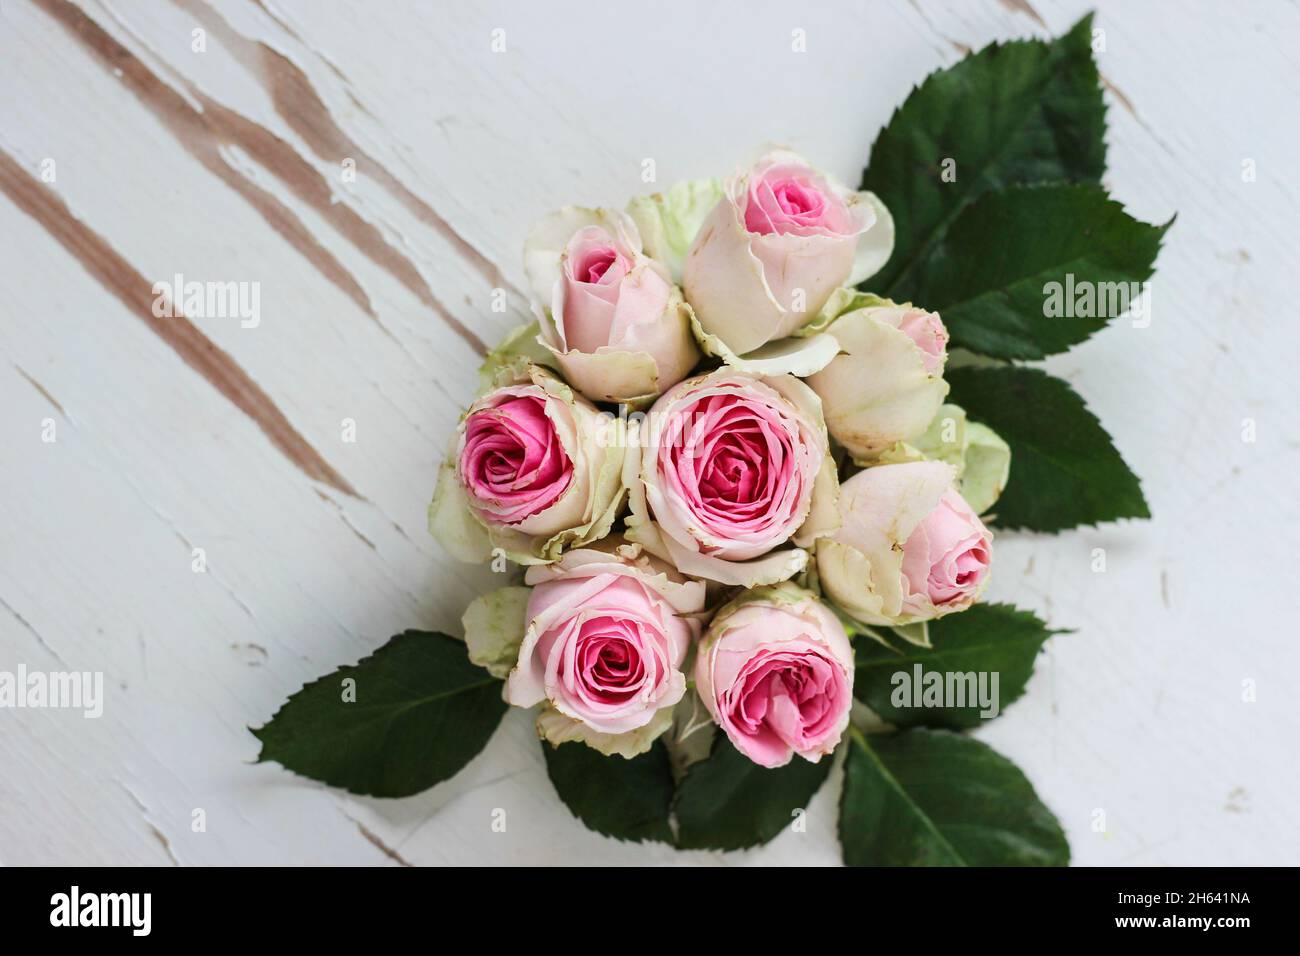 bouquet of flowers,individual flowers form one large flower Stock Photo